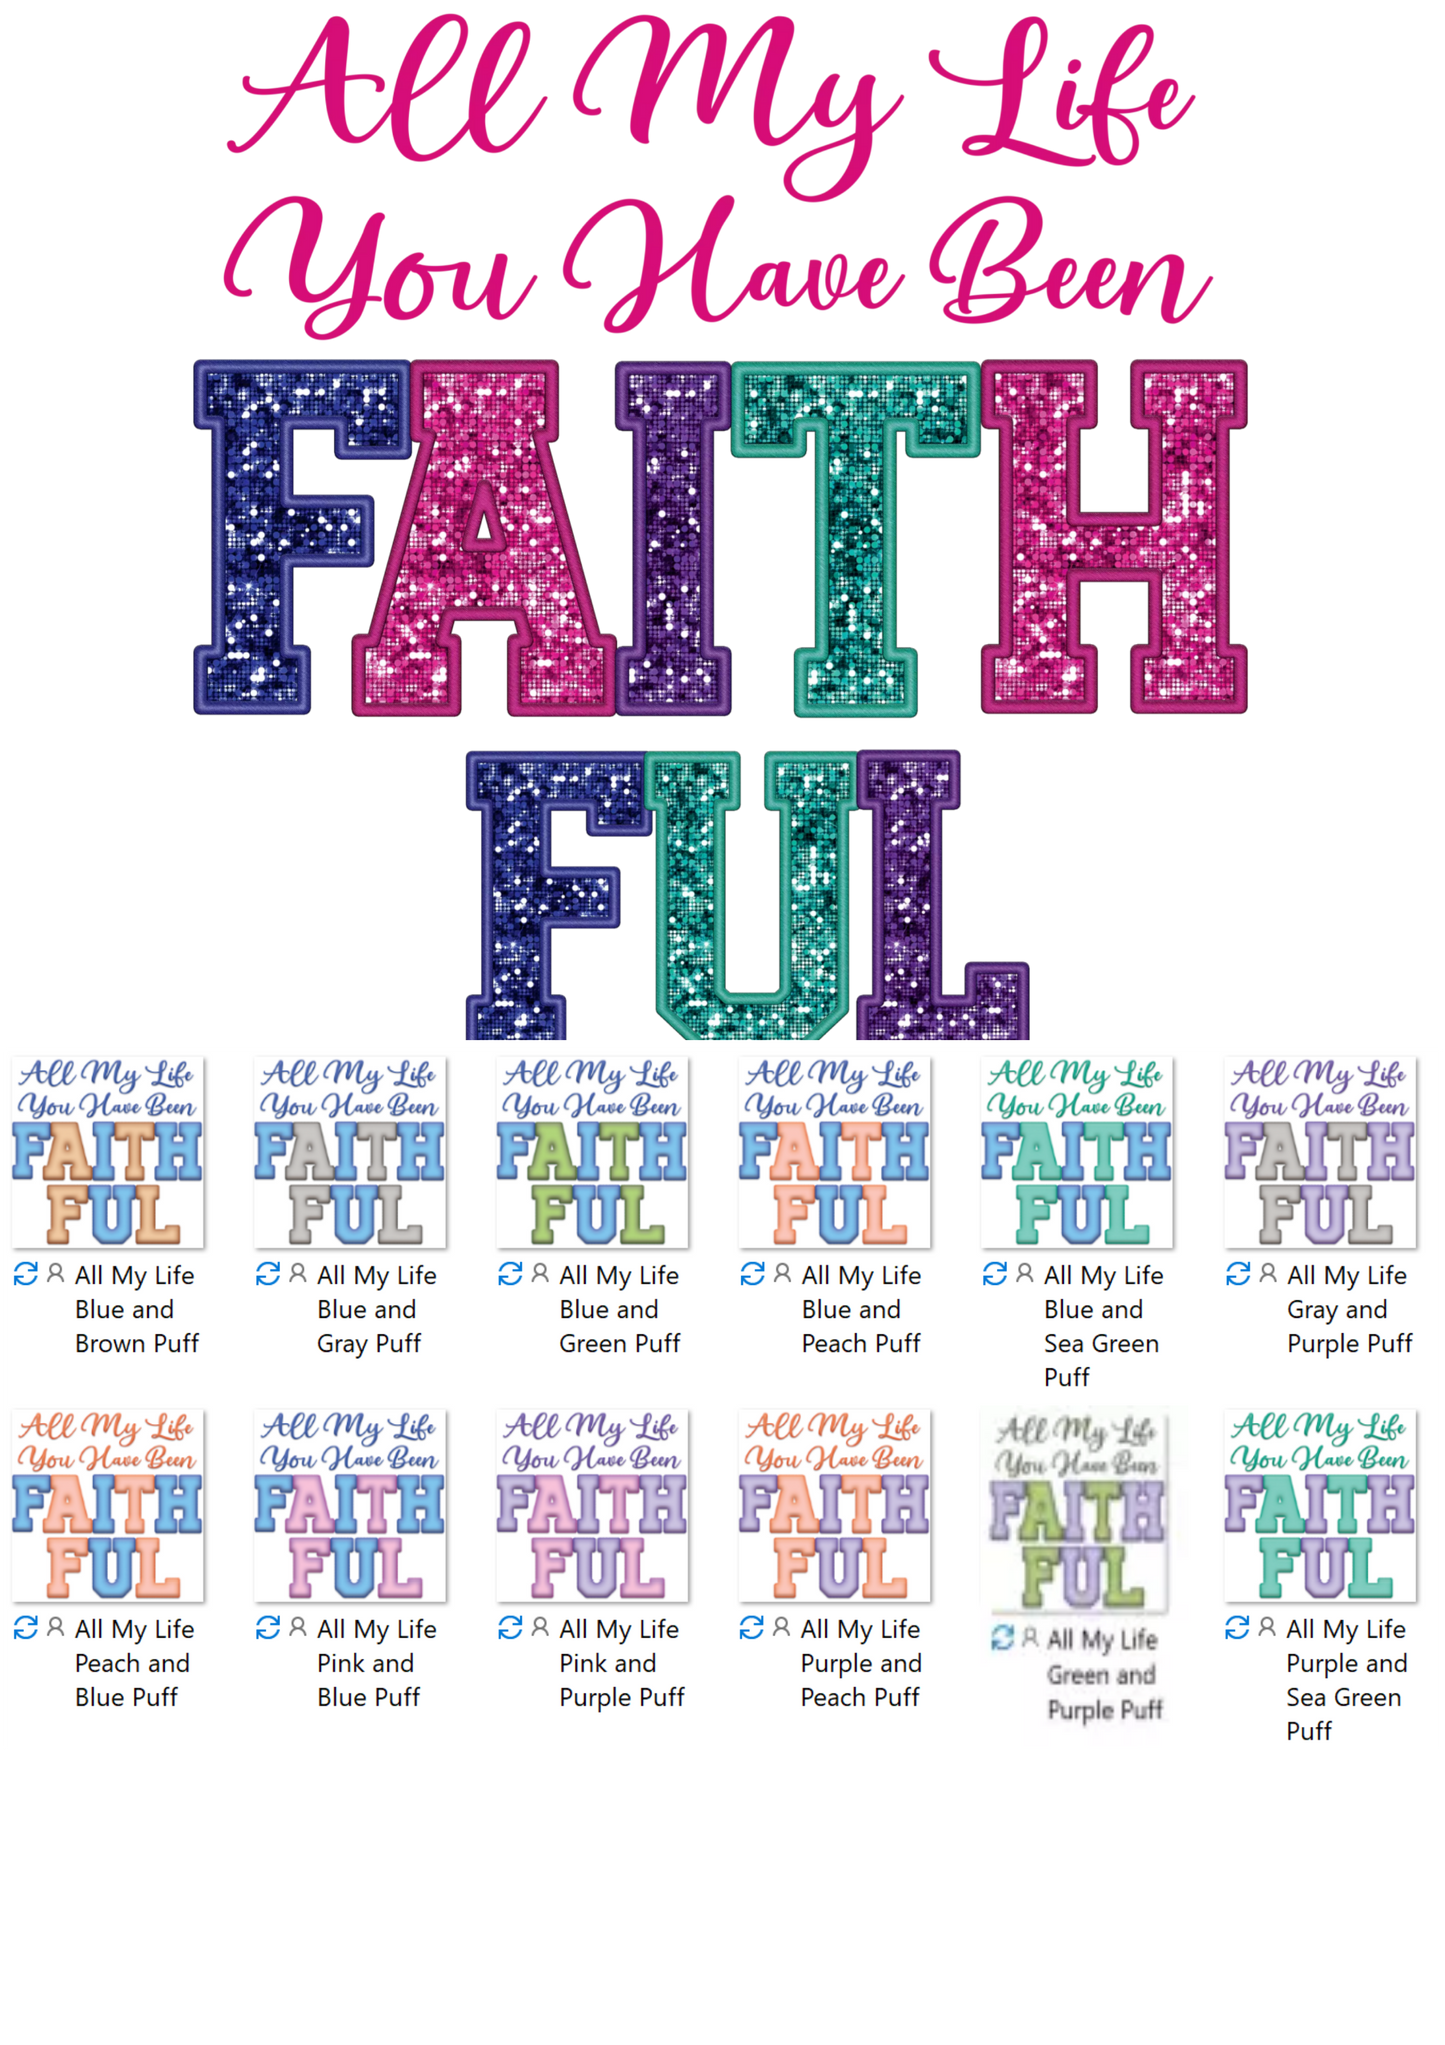 All My Life You Have Been Faithful Puff Bundle - Digital File Only